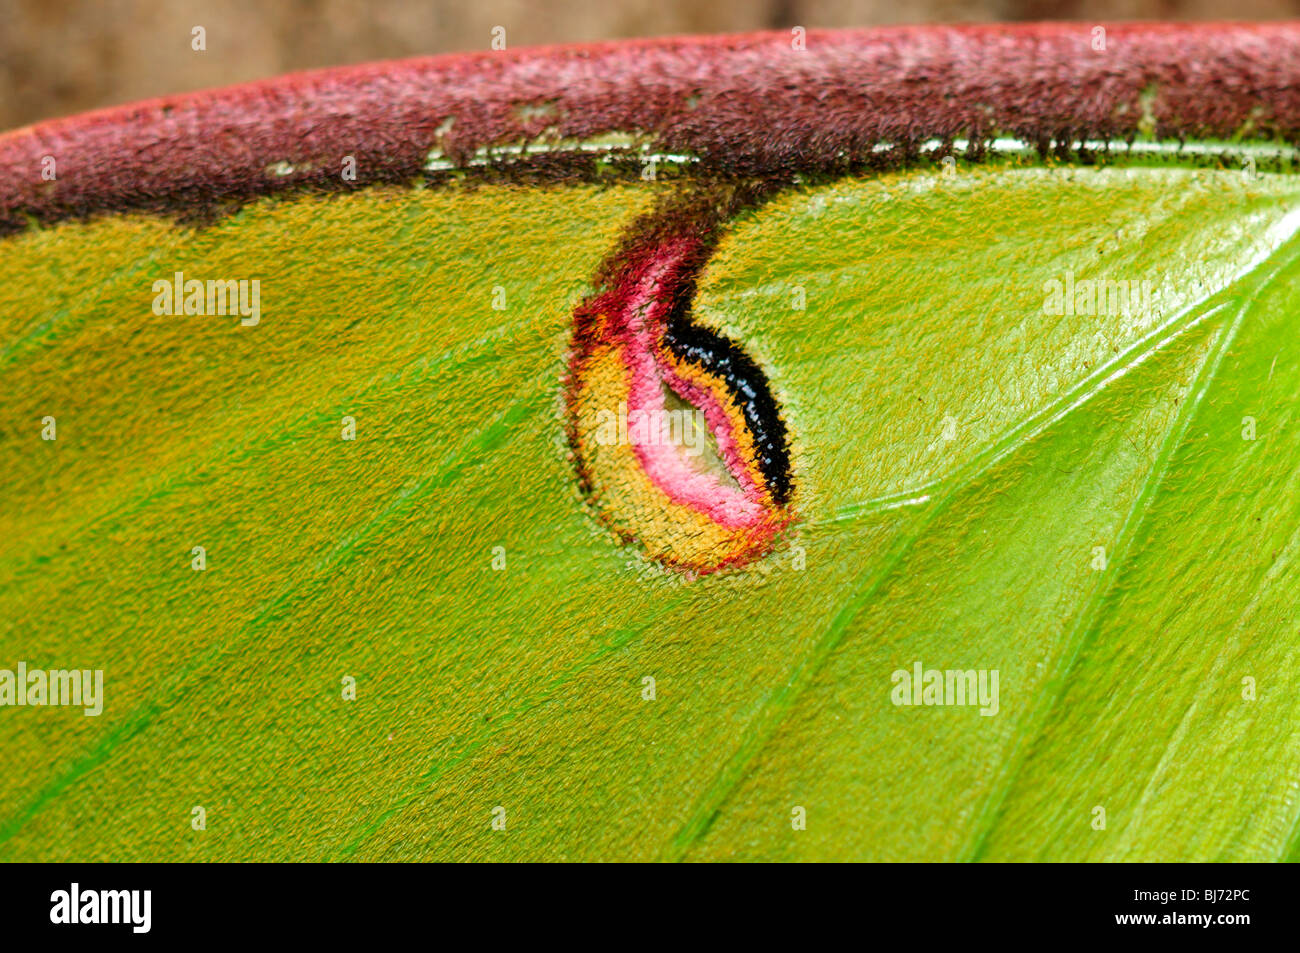 A close-up on the scaled wing of a green Luna moth (Actias luna). Stock Photo